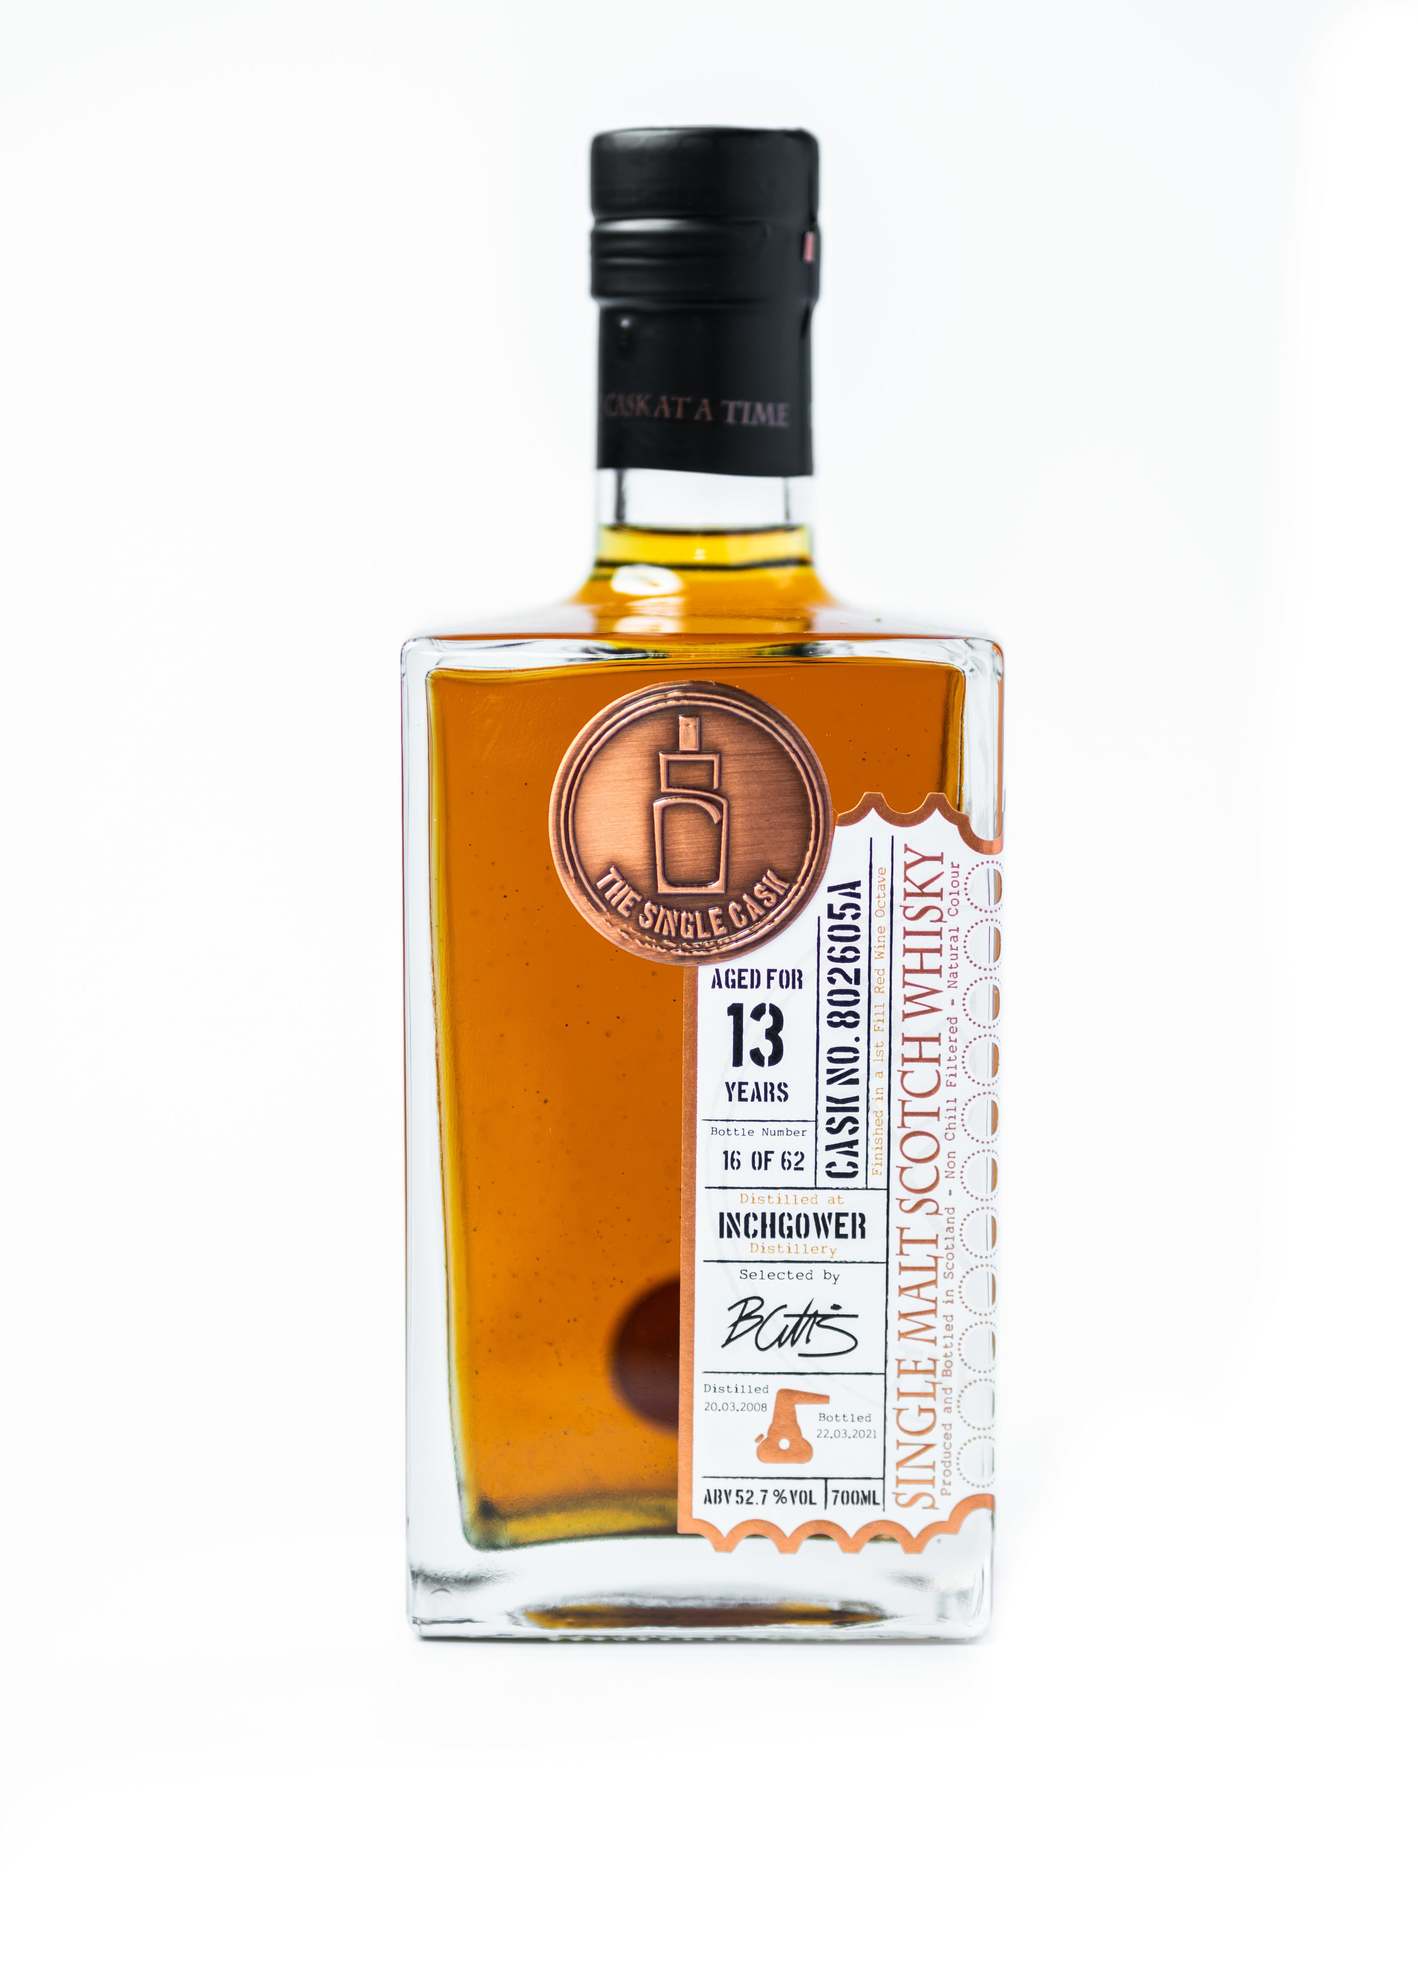 Inchgower 13 years old scotch whisky by The Single Cask independent bottler